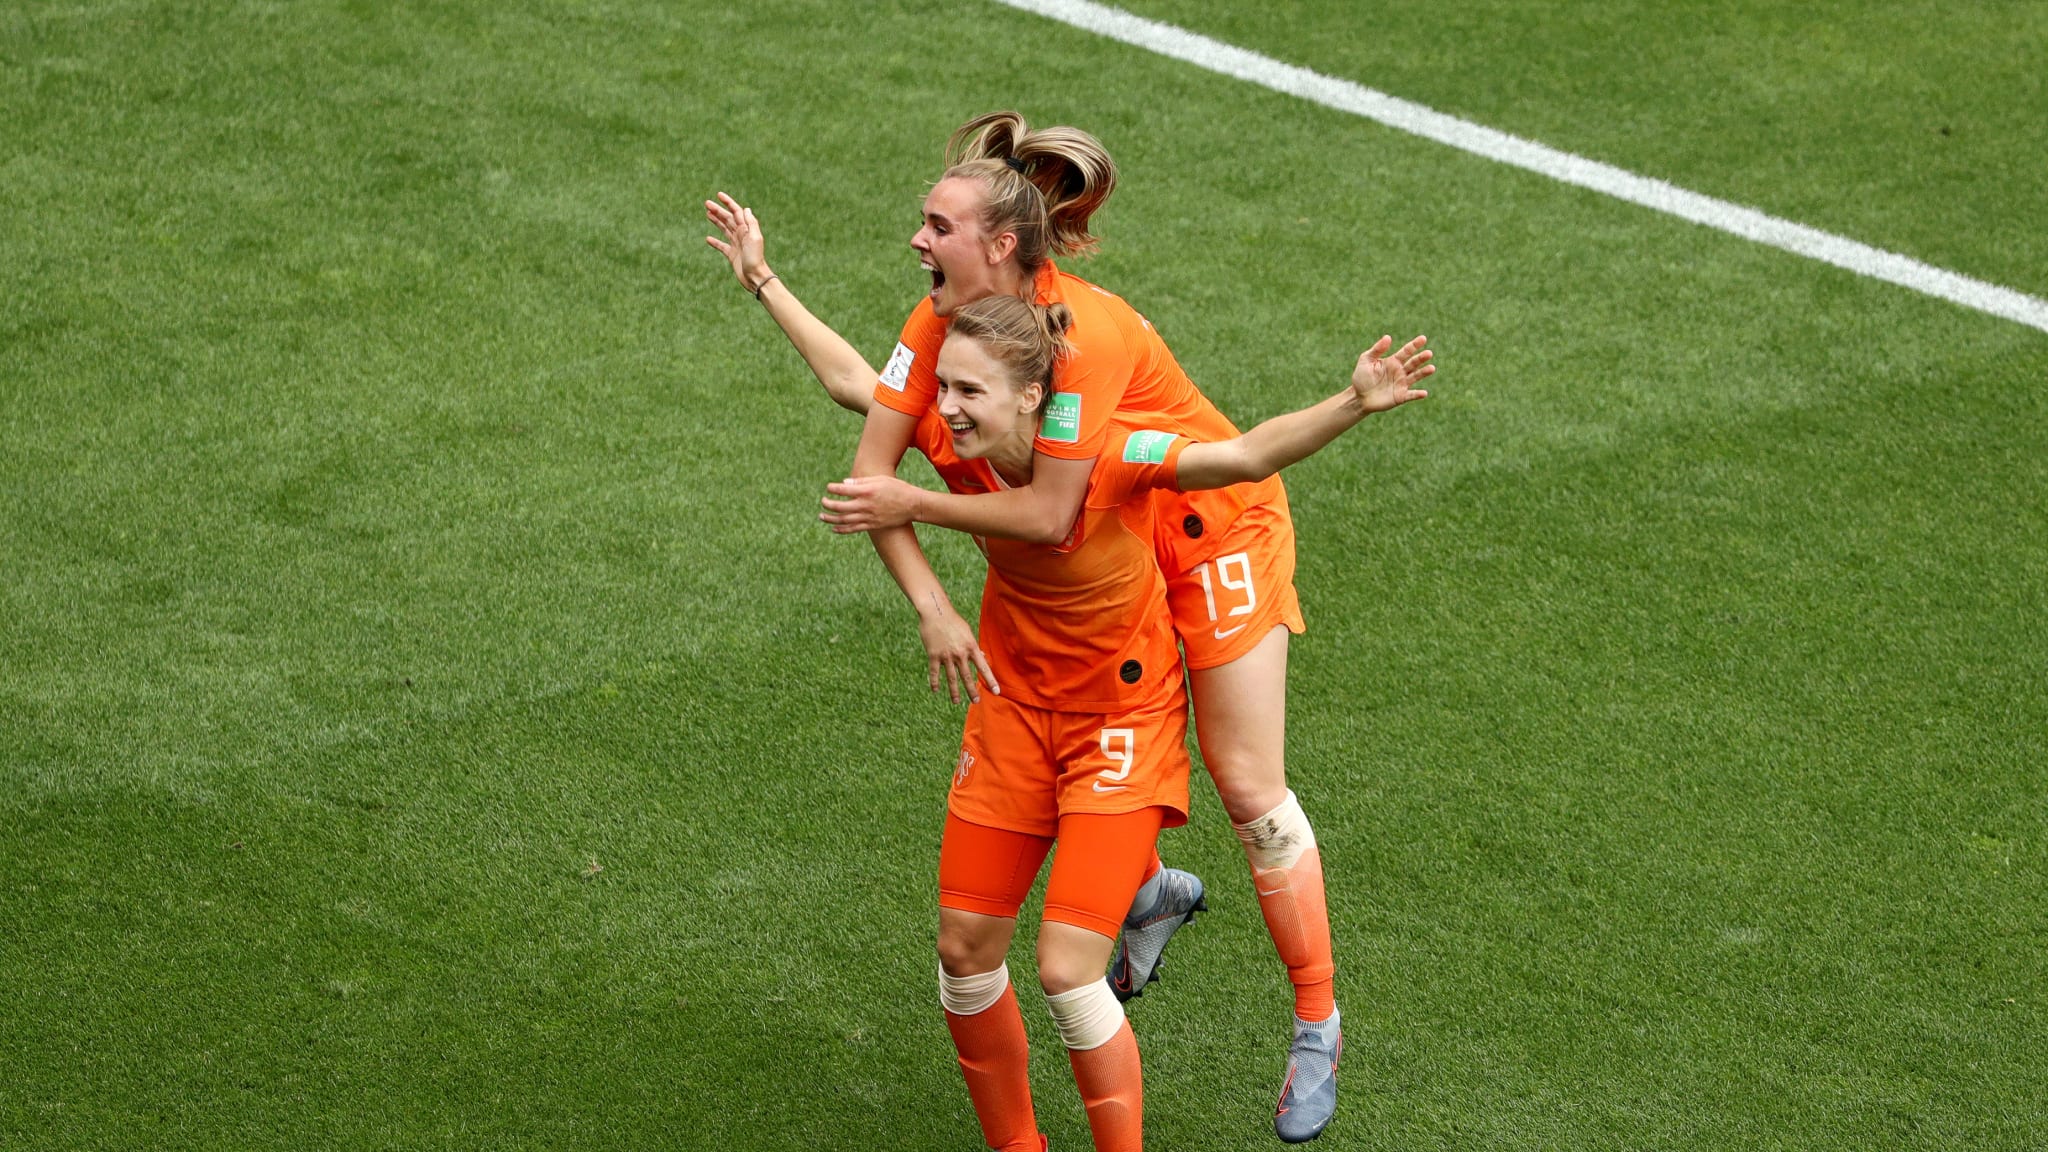 FIFA Women's World Cup 2019™: You have to get crazy when you break a record